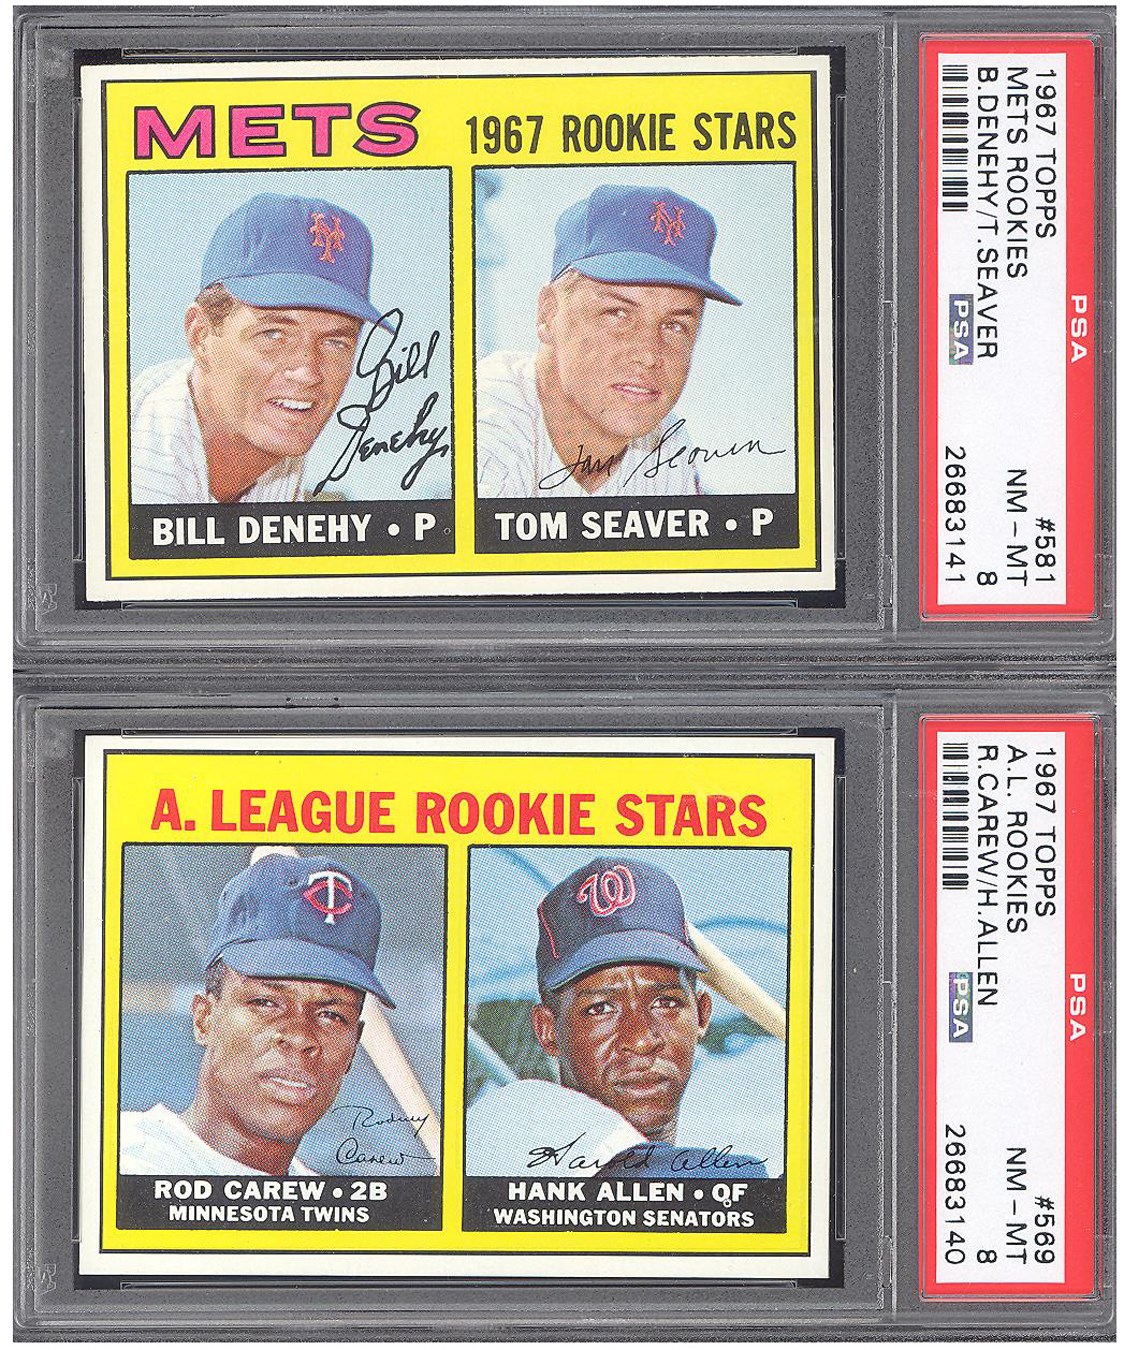 1967 Topps Extremely High Grade Complete Set (609) with (16) PSA Graded